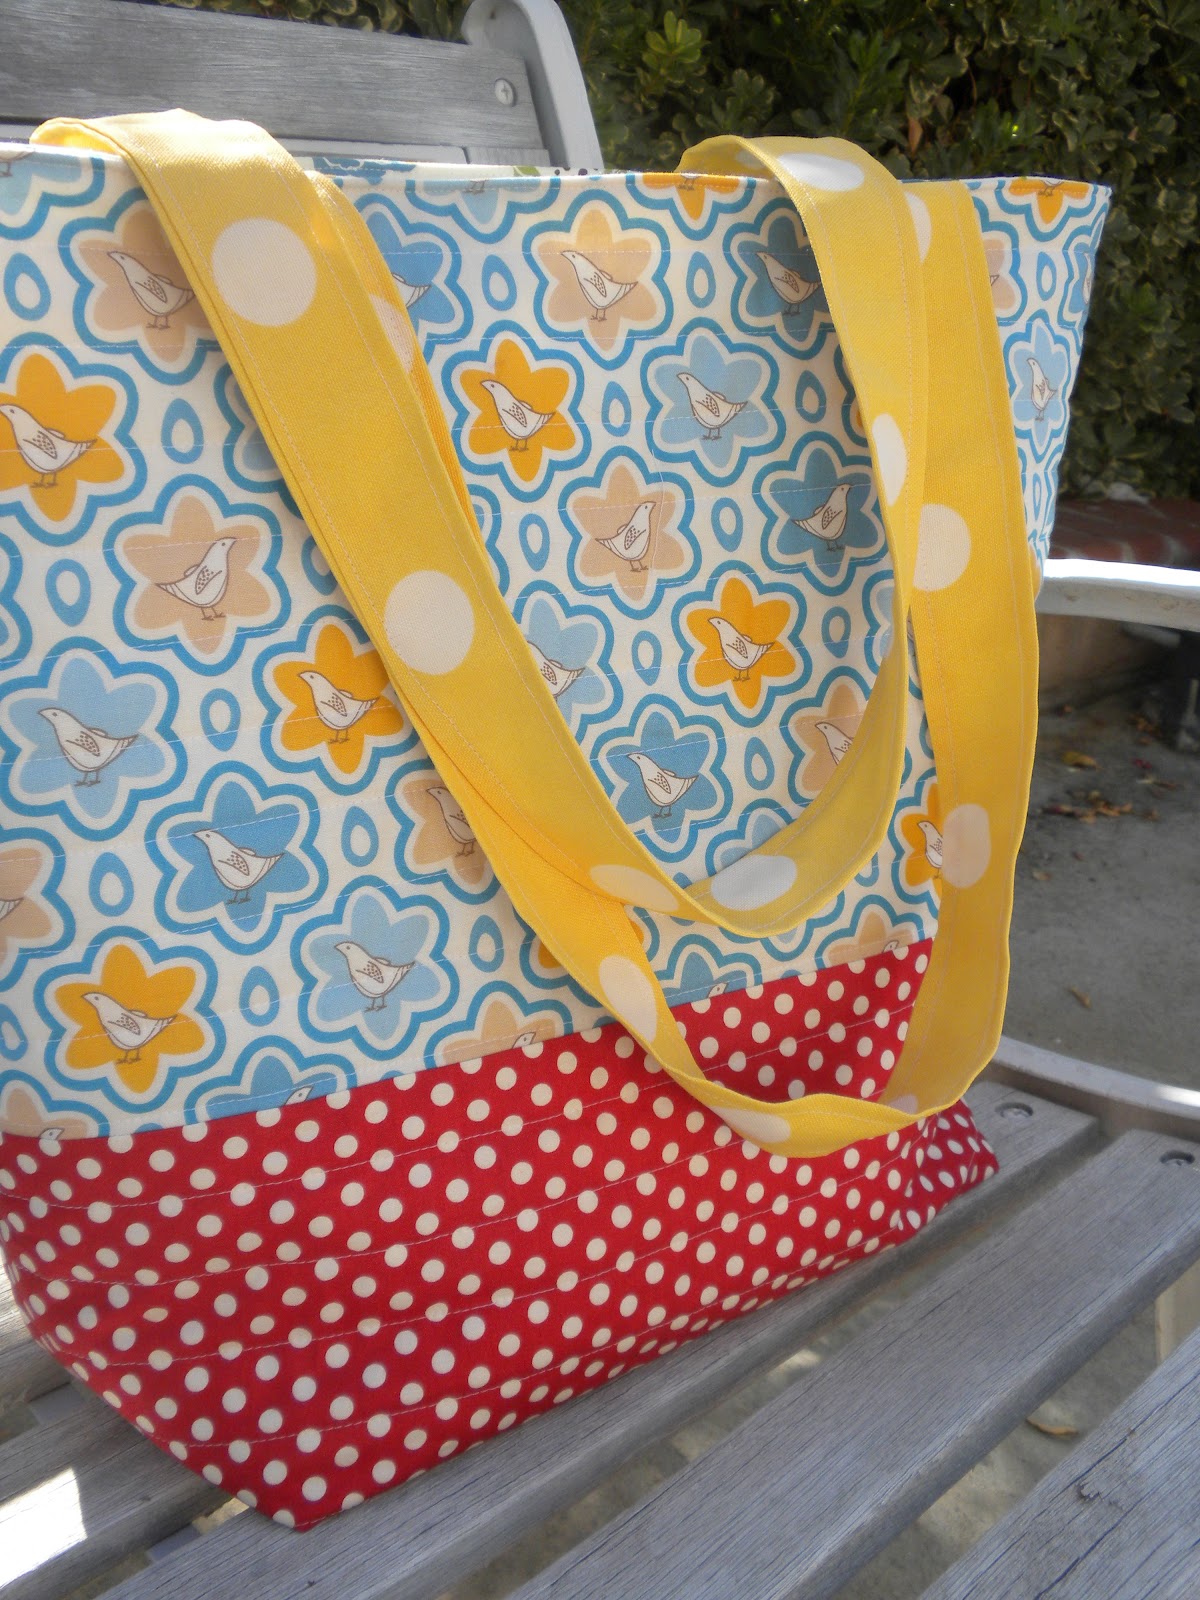 Jedi Craft Girl: Quilted Tote Bag Tutorial